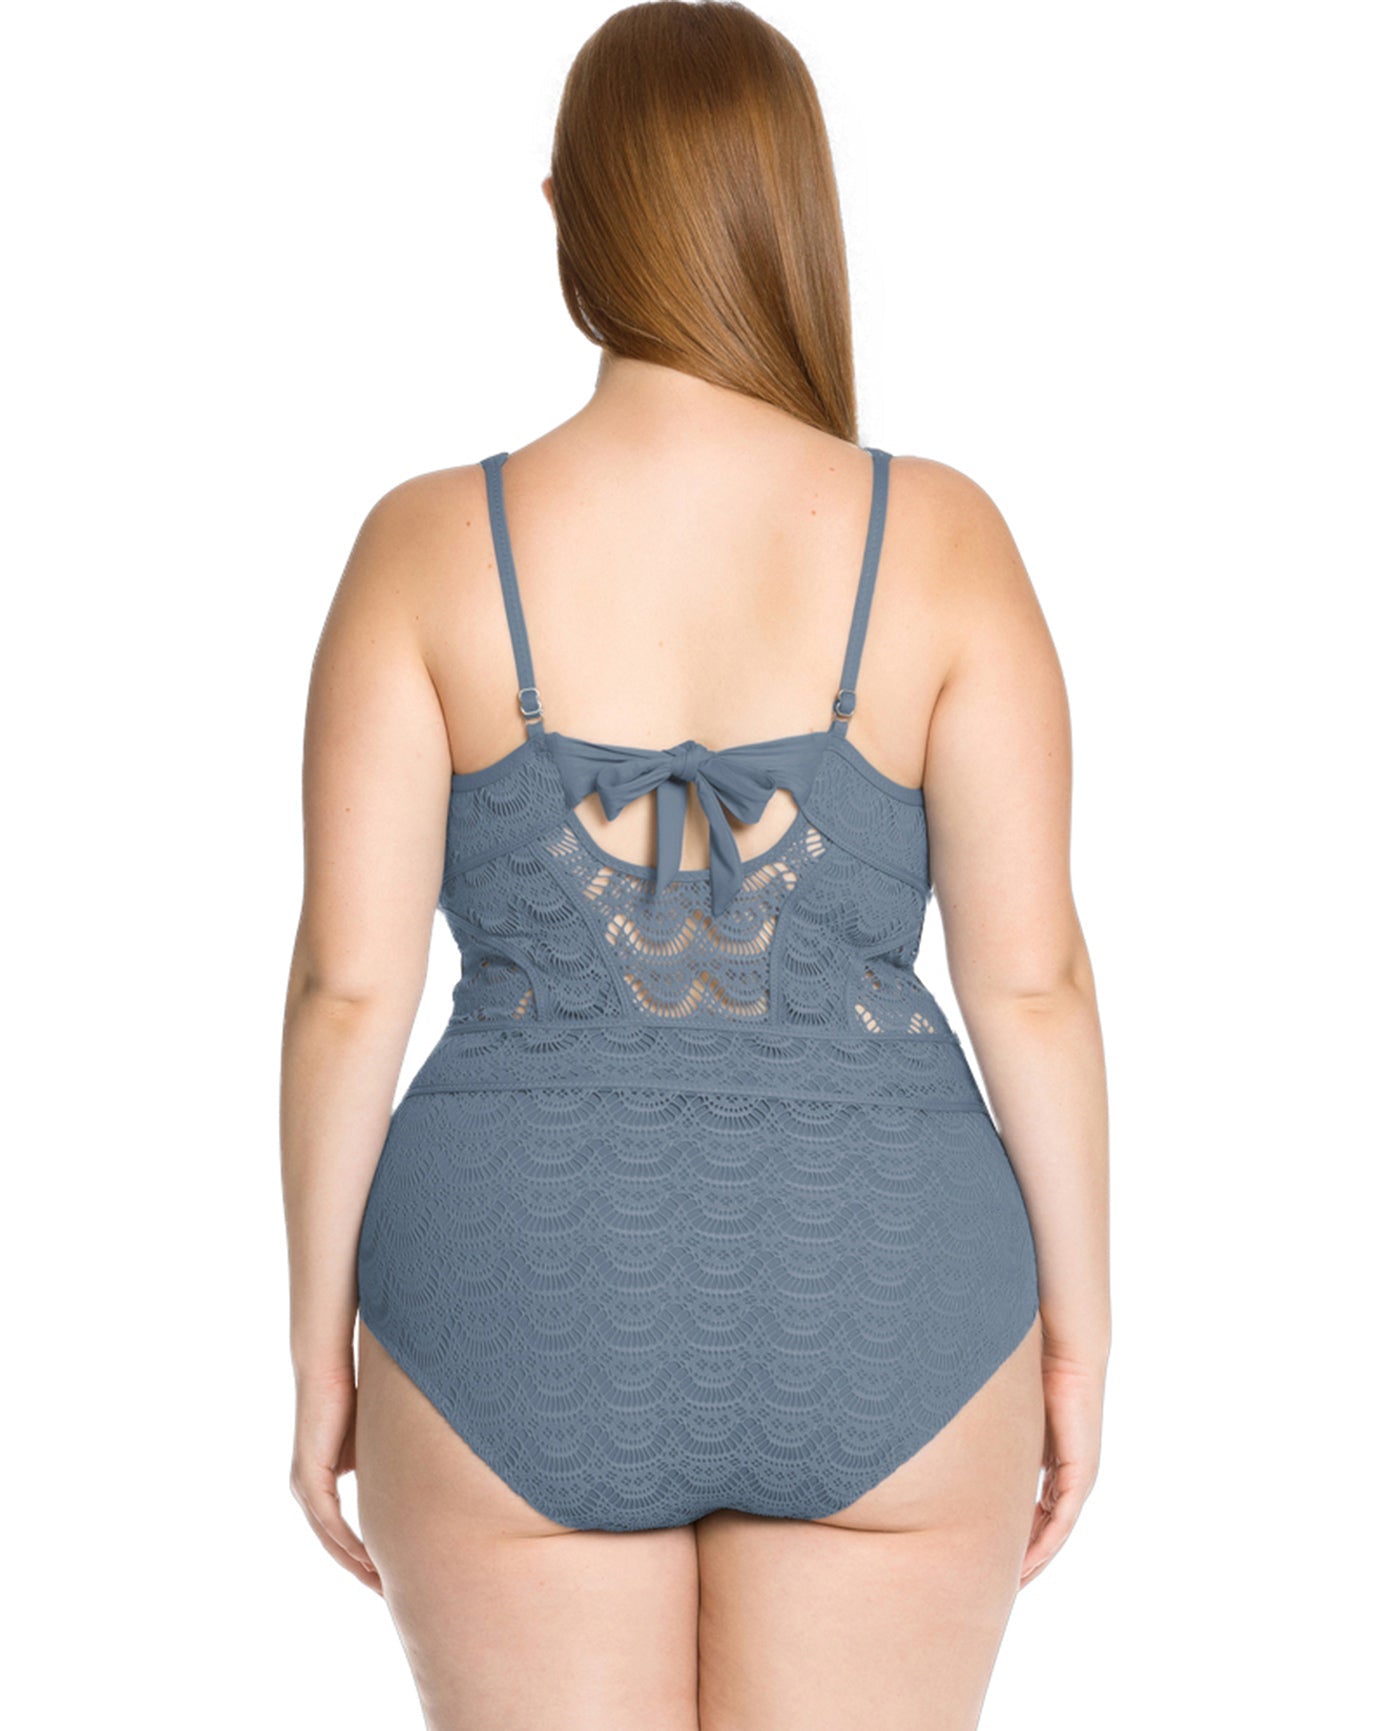 Back View Of Becca ETC by Rebecca Virtue Color Play Lace High Neck Plus Size One Piece Swimsuit | BEC Color Play Steel